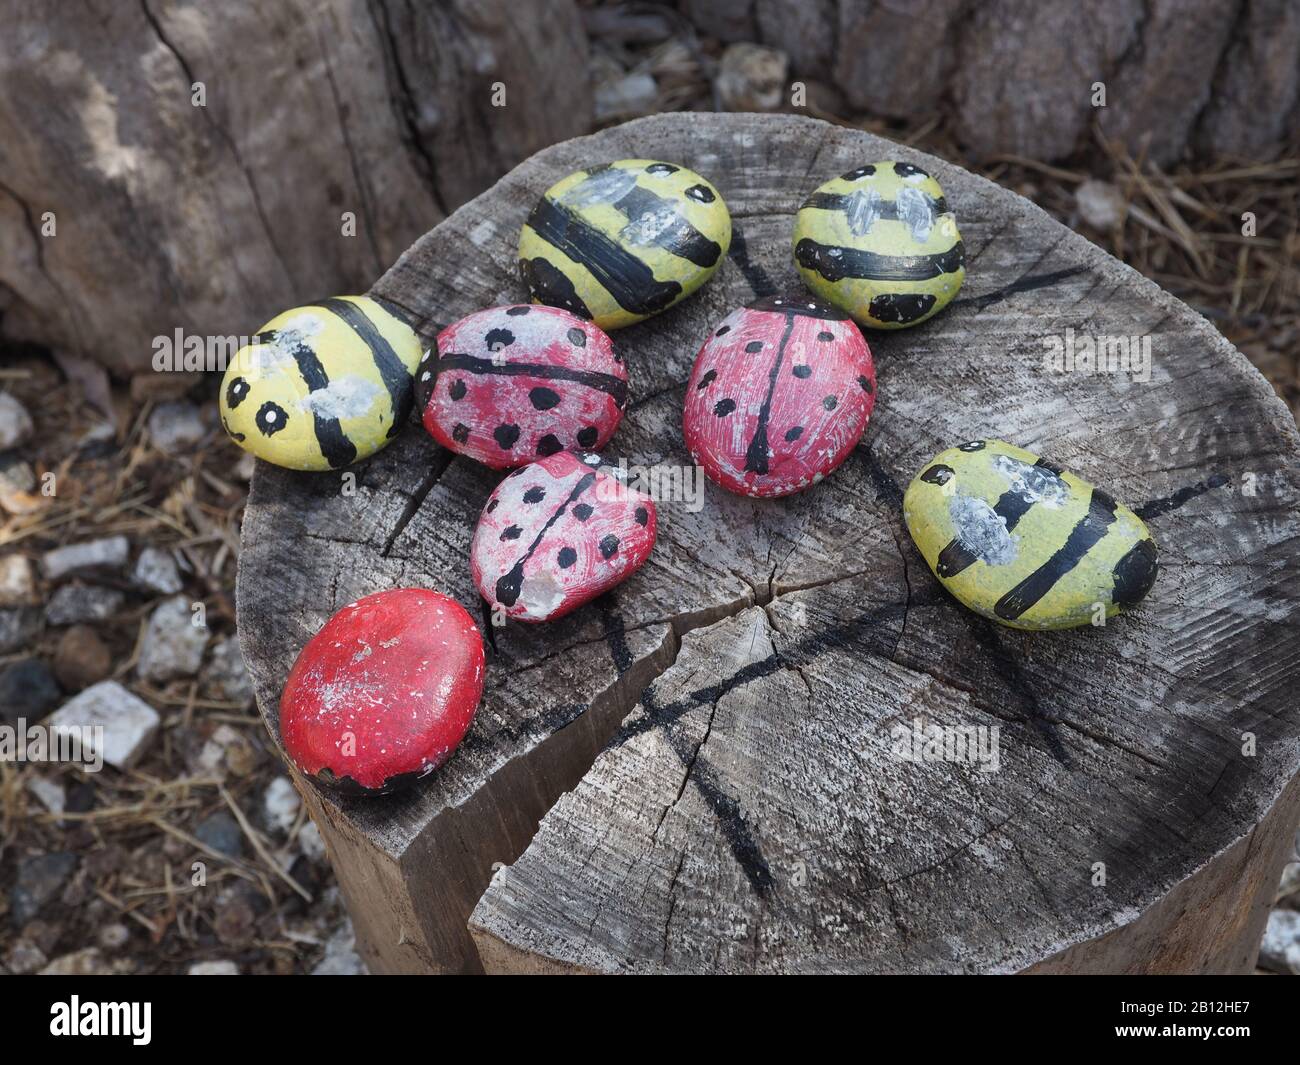 Stones painted to look like insects on a table made from a log Stock Photo